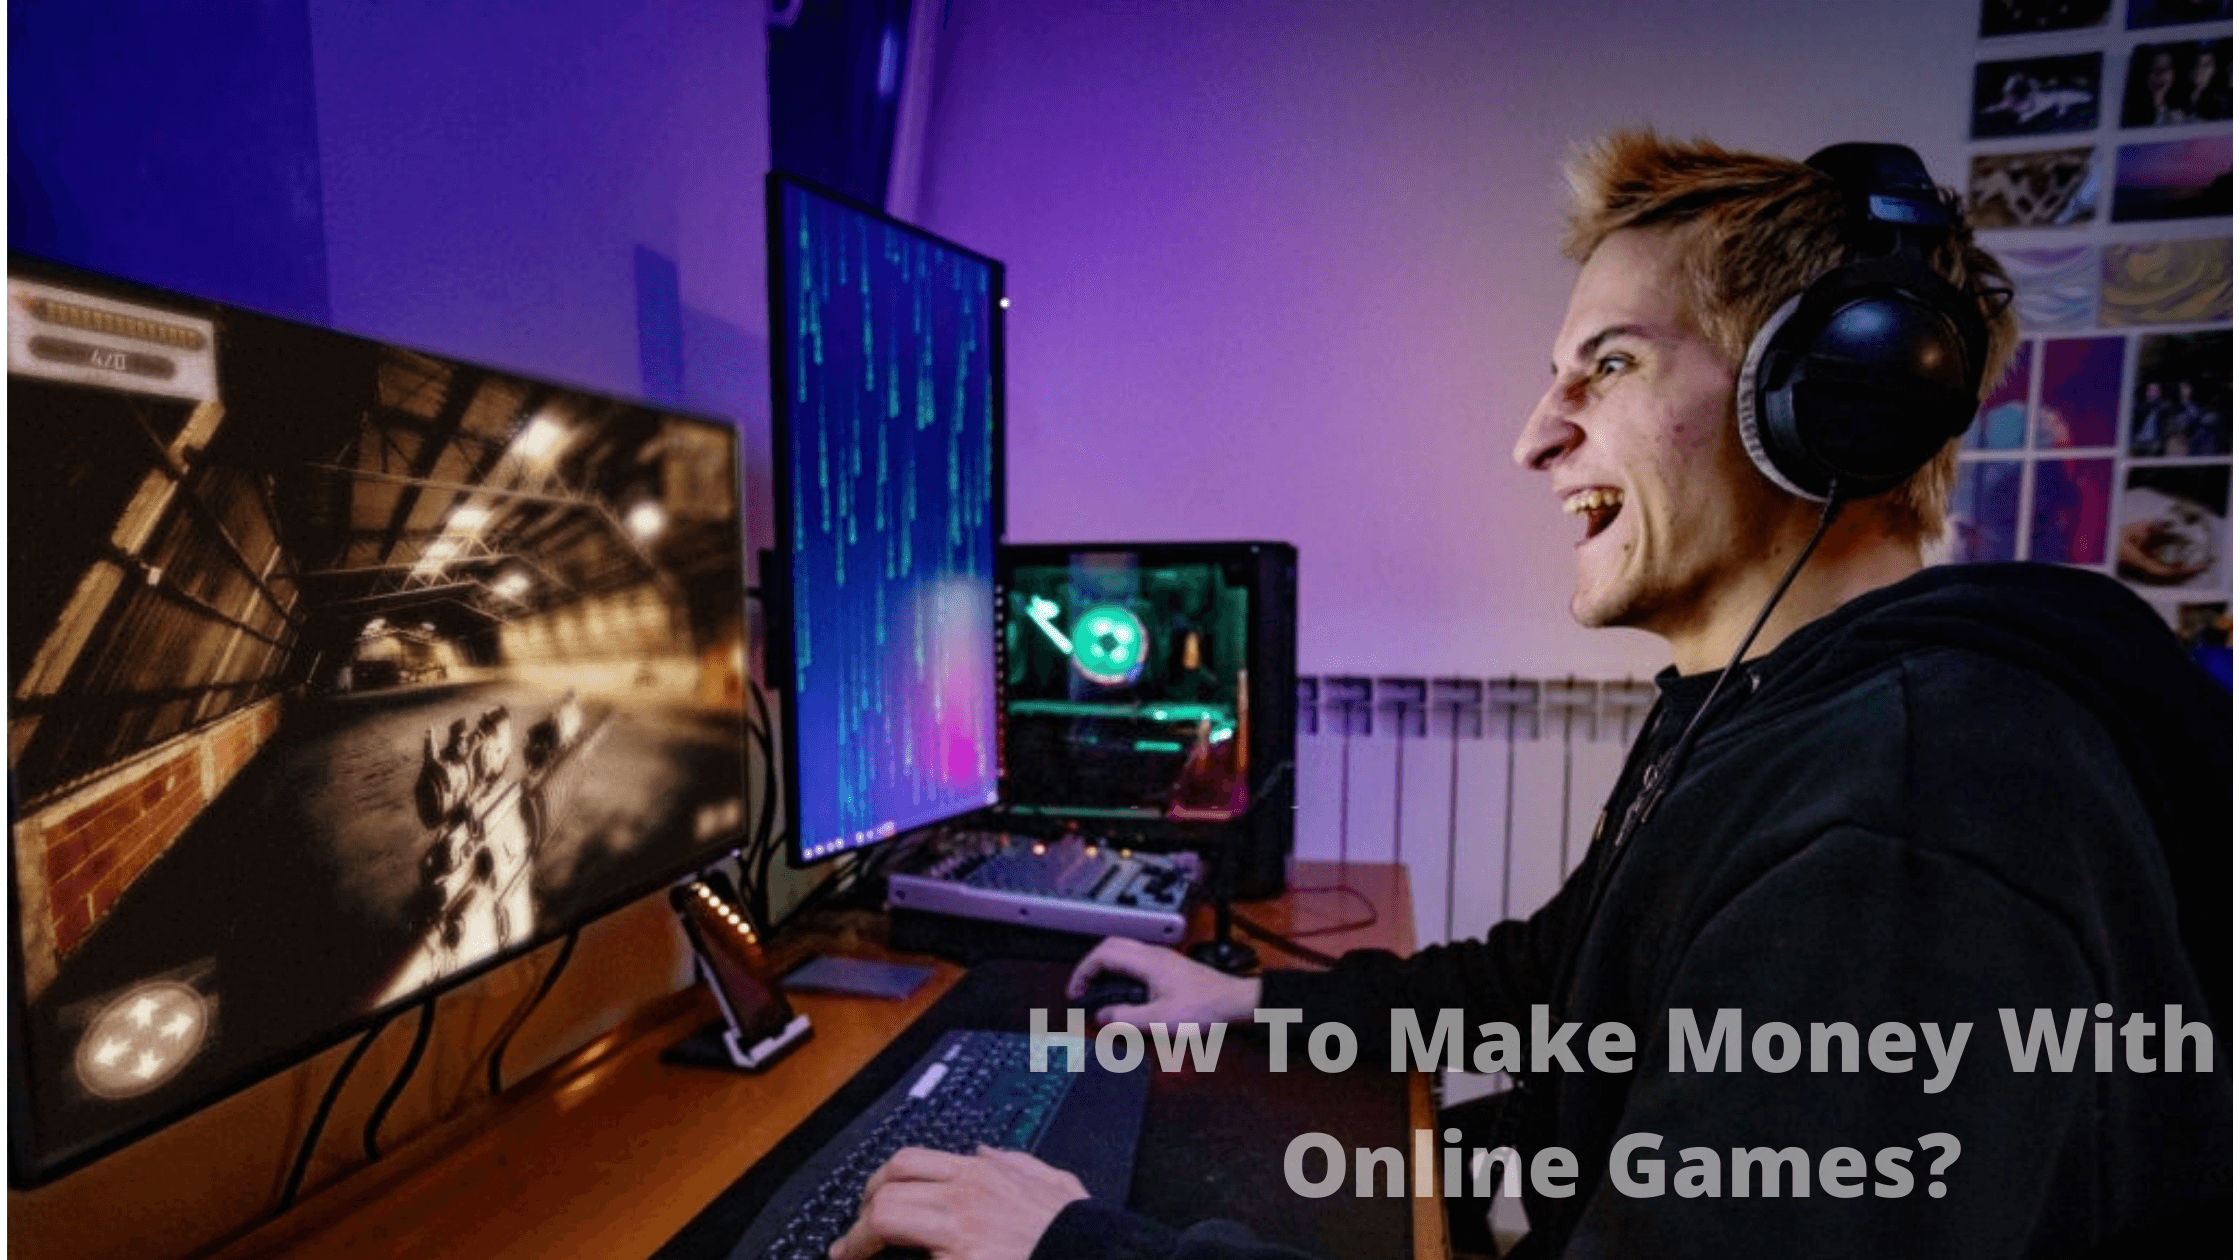 Make Money With Online Games